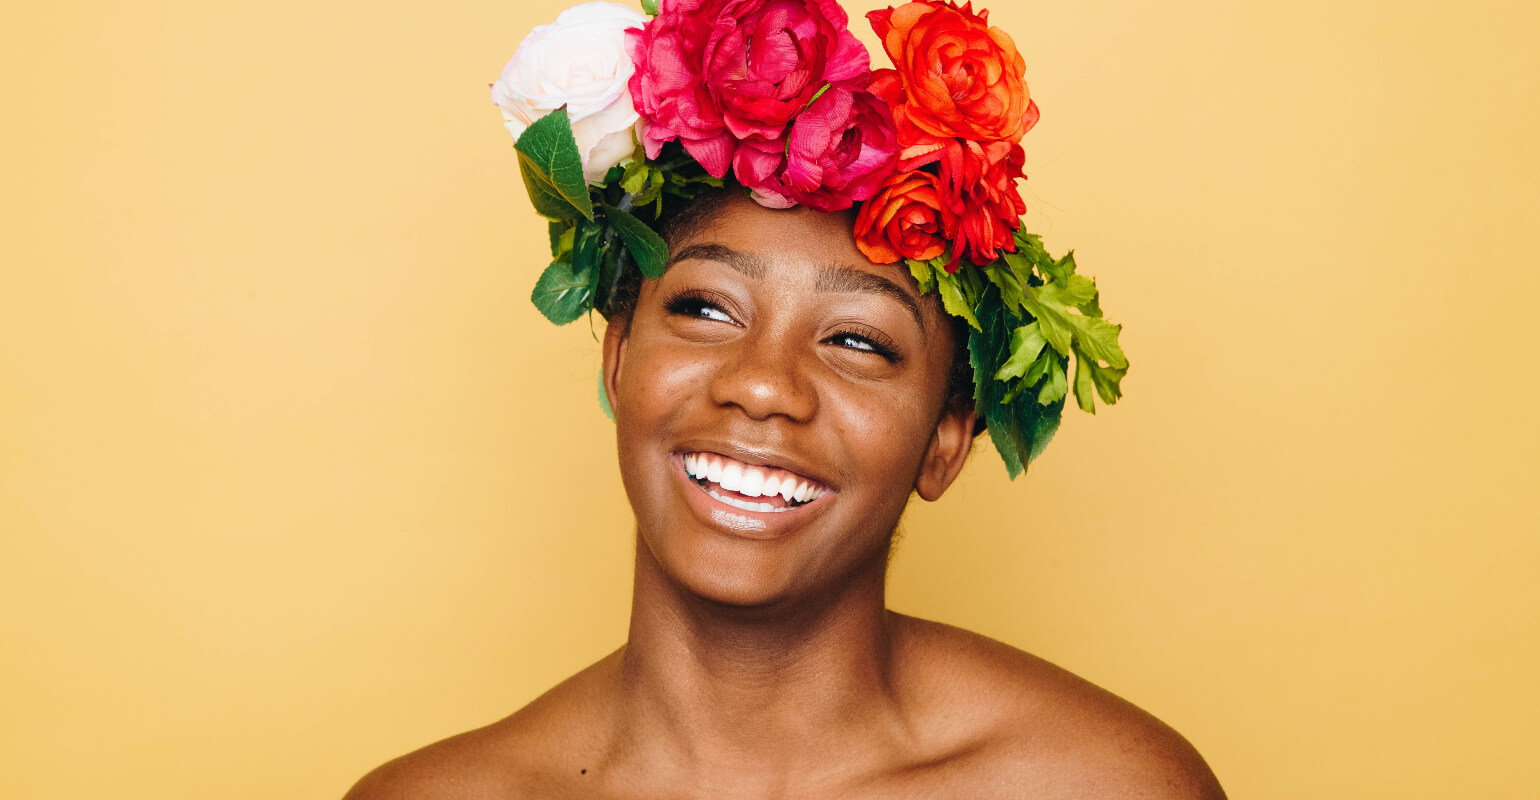 Portrait of an African woman with a wreath